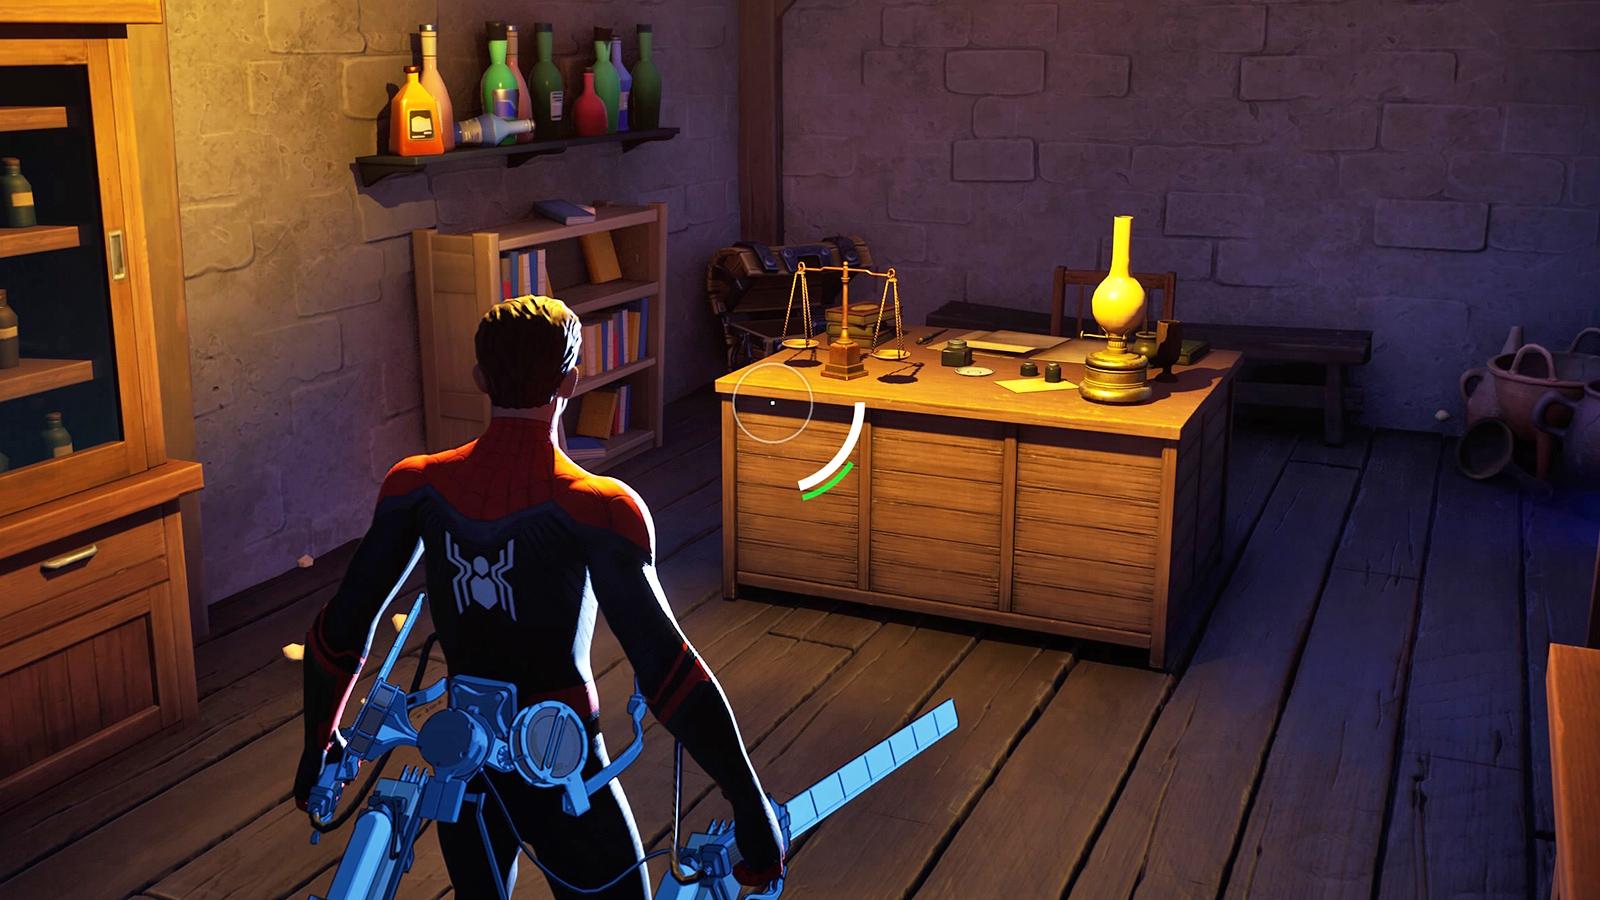 A screenshot of Jaeger's Family Basement location in Fortnite